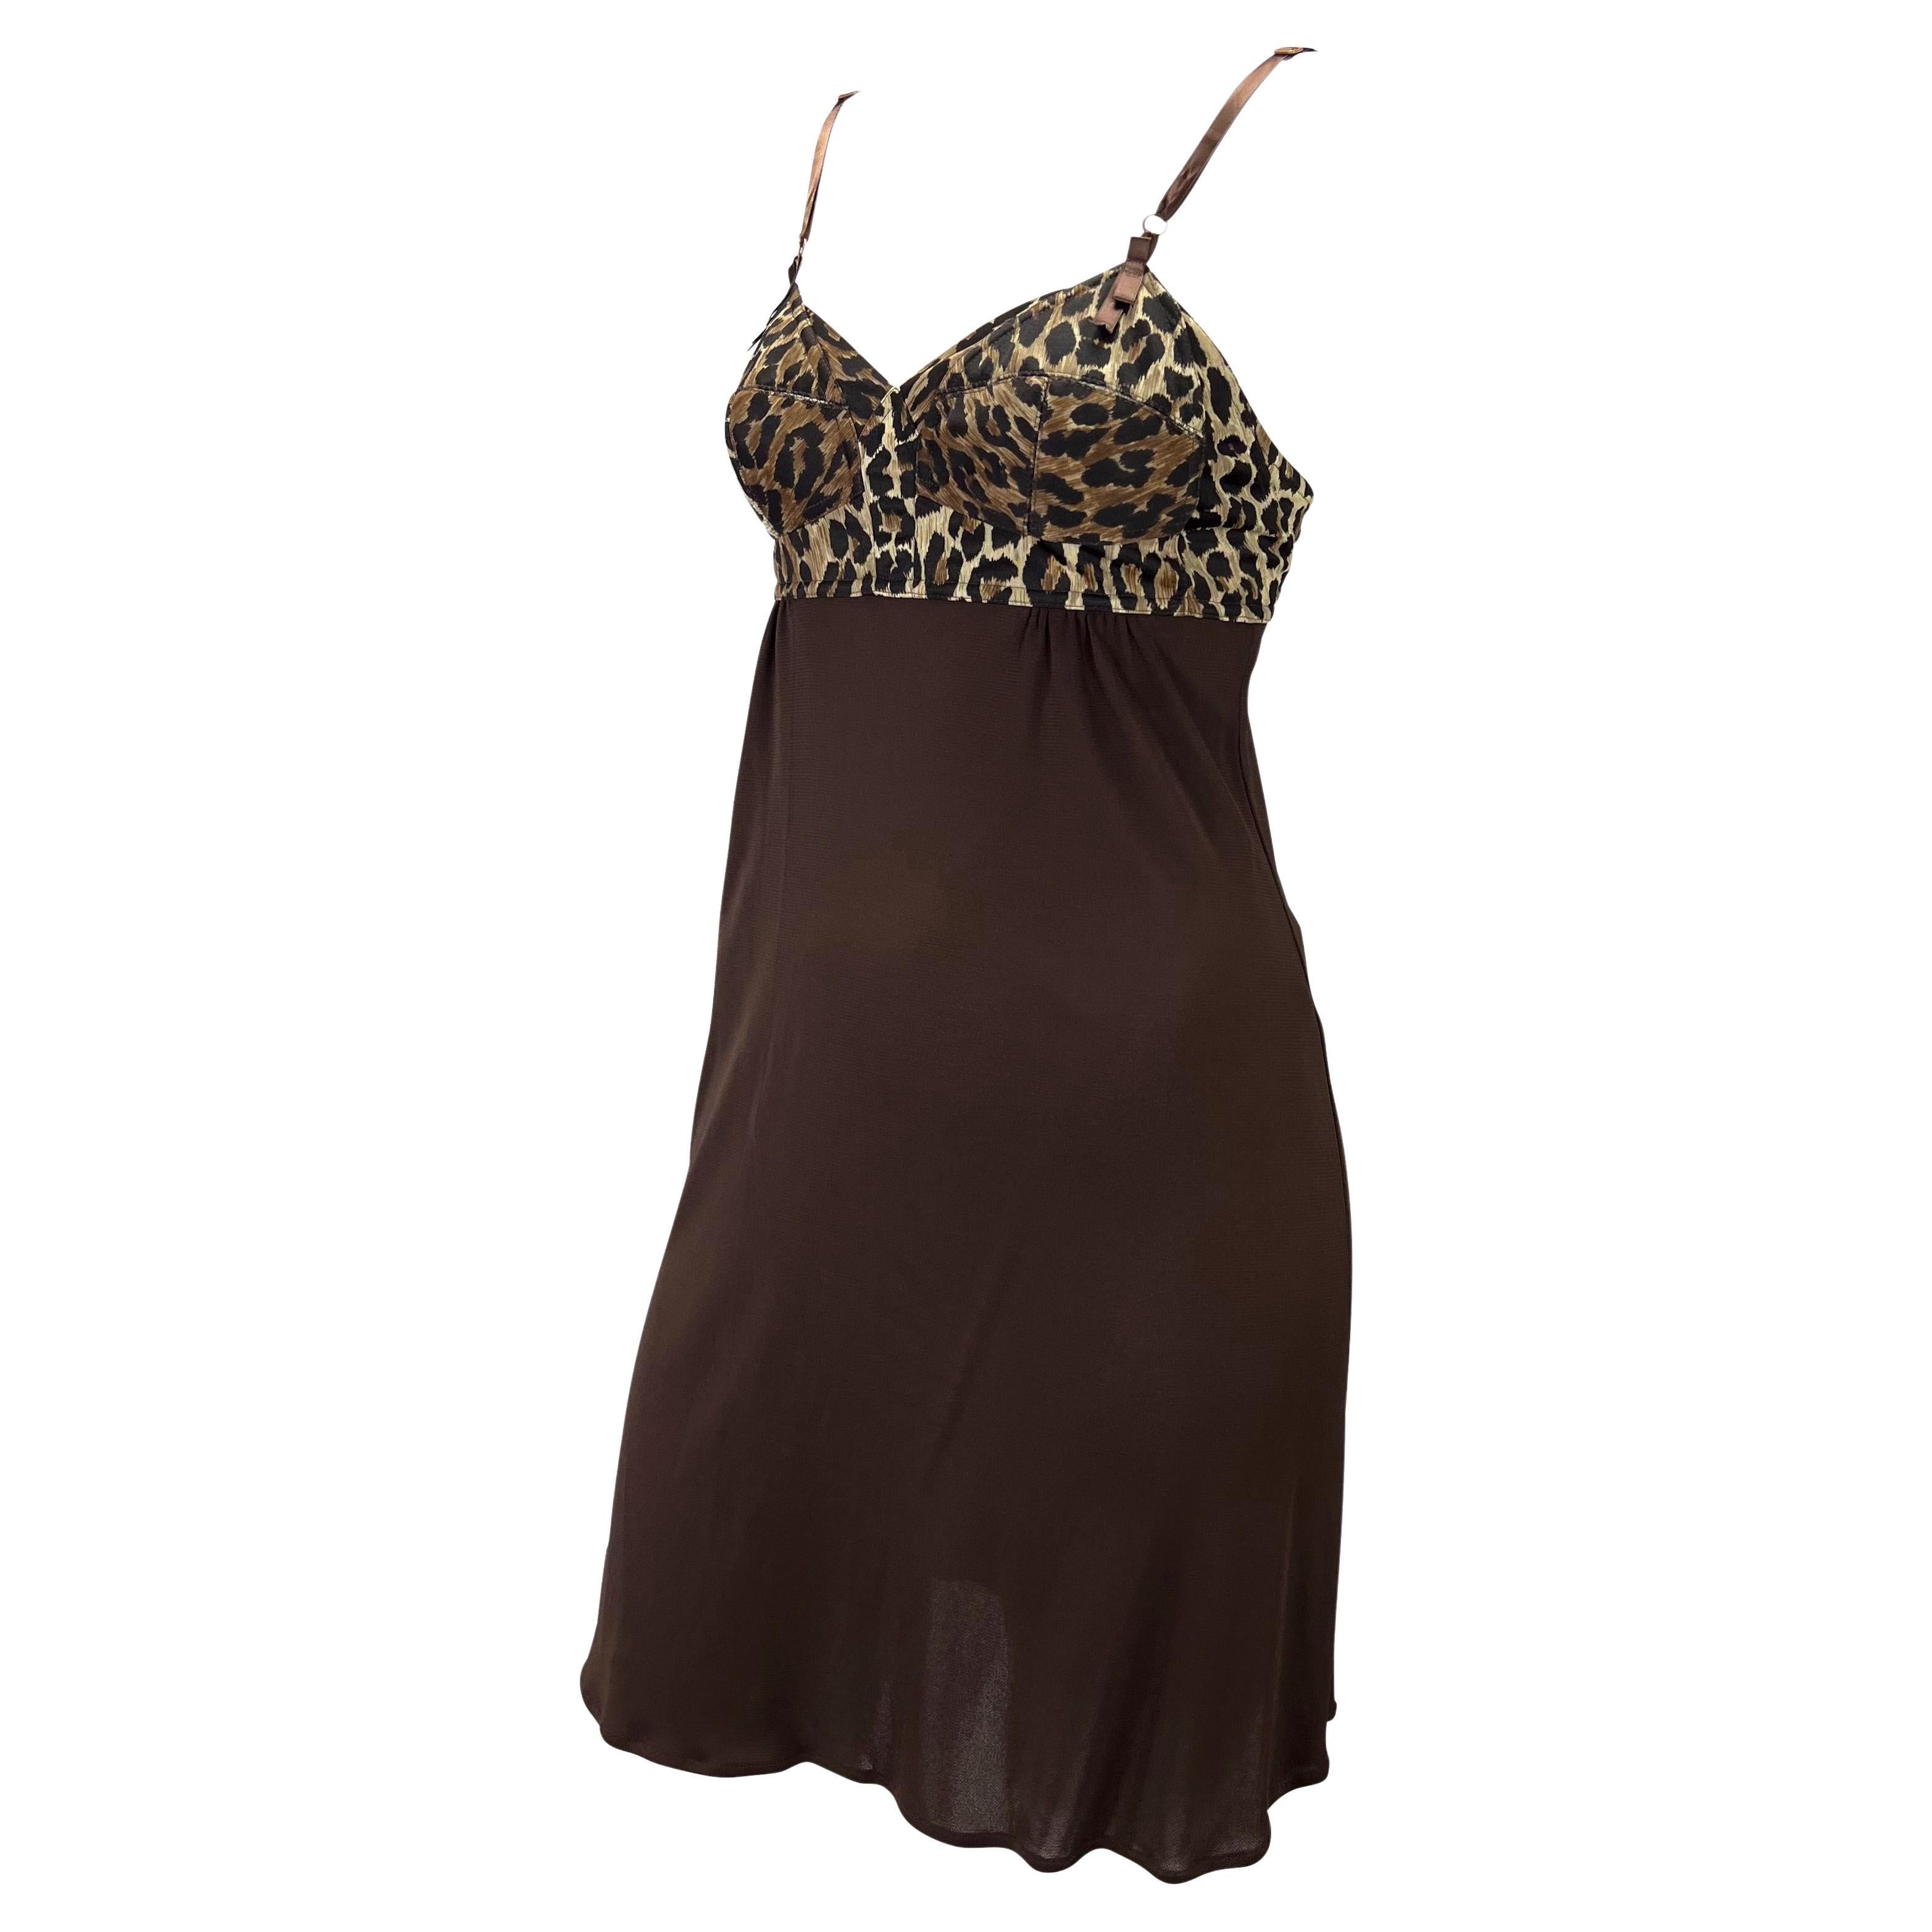 Presenting a brown cheetah print Dolce and Gabbana slip dress. From the Spring/Summer 1997, this beautiful dress features a cheetah print bust with a brown skirt. Made complete with a tie at the back, this lingerie-esque this piece is the perfect